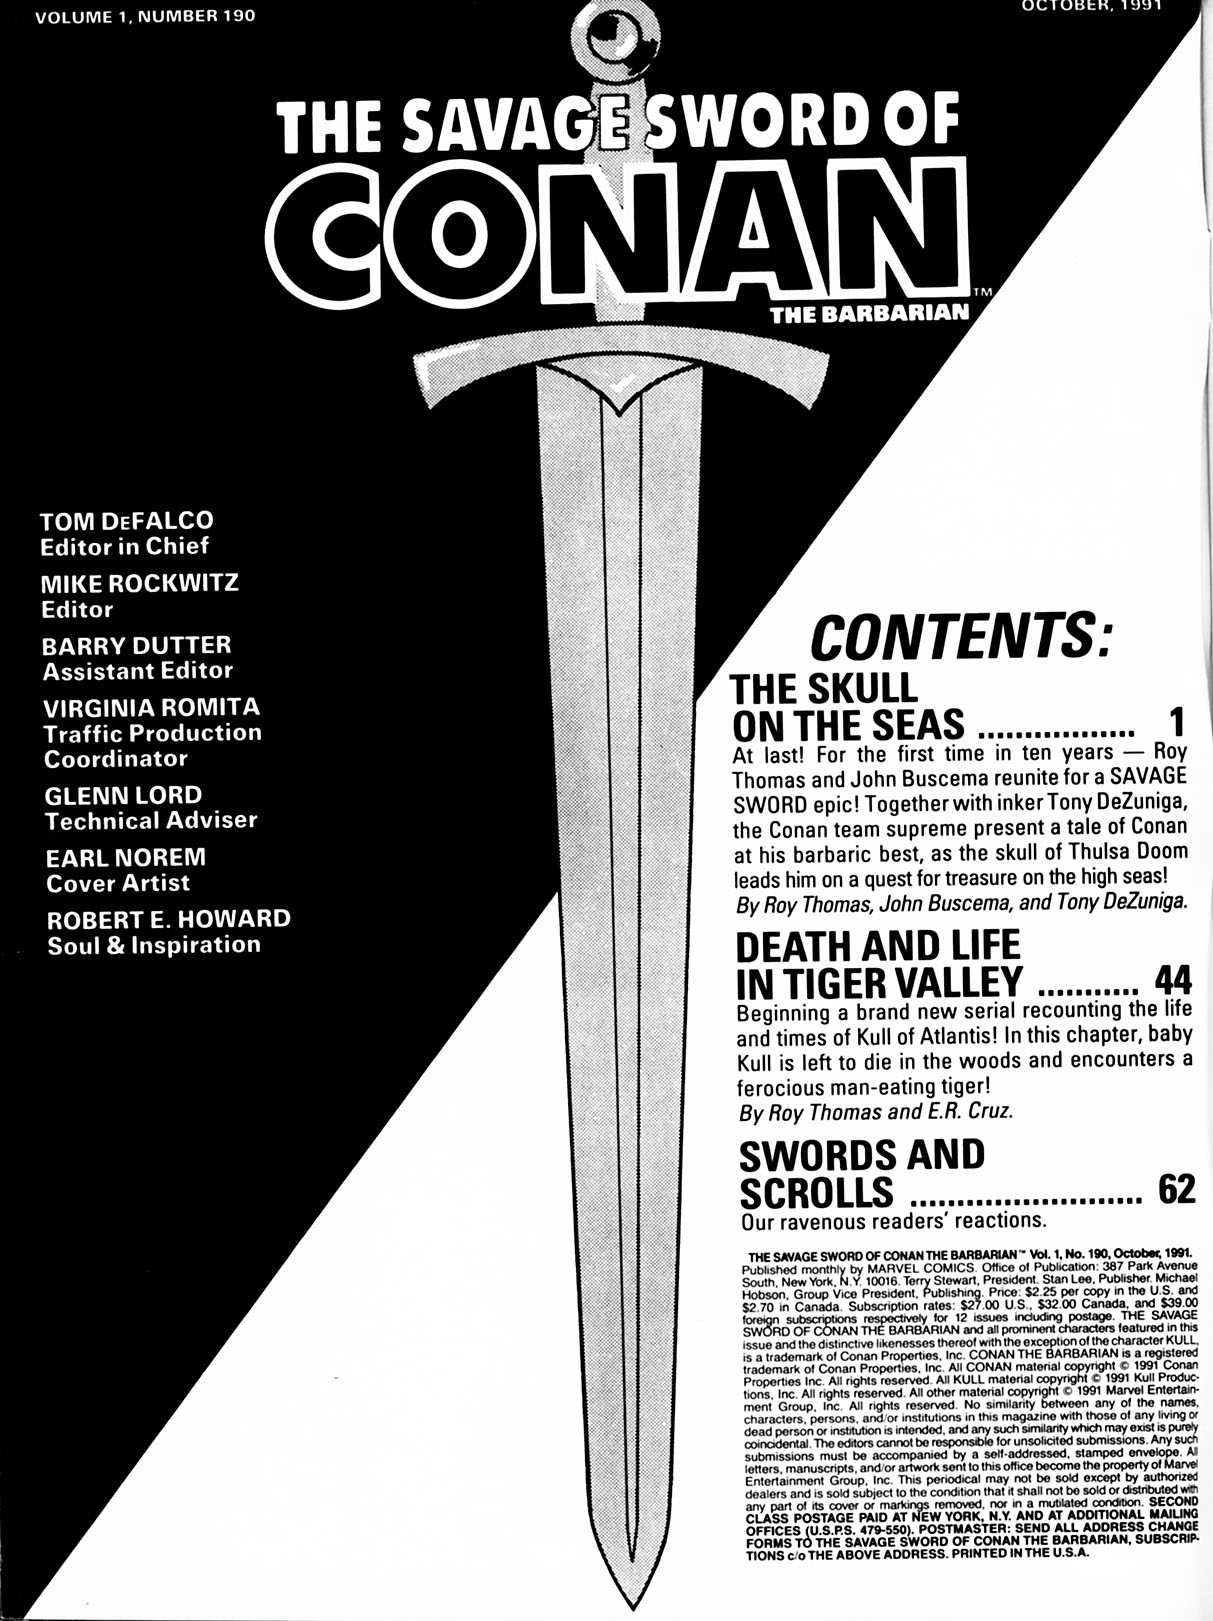 Read online The Savage Sword Of Conan comic -  Issue #190 - 2